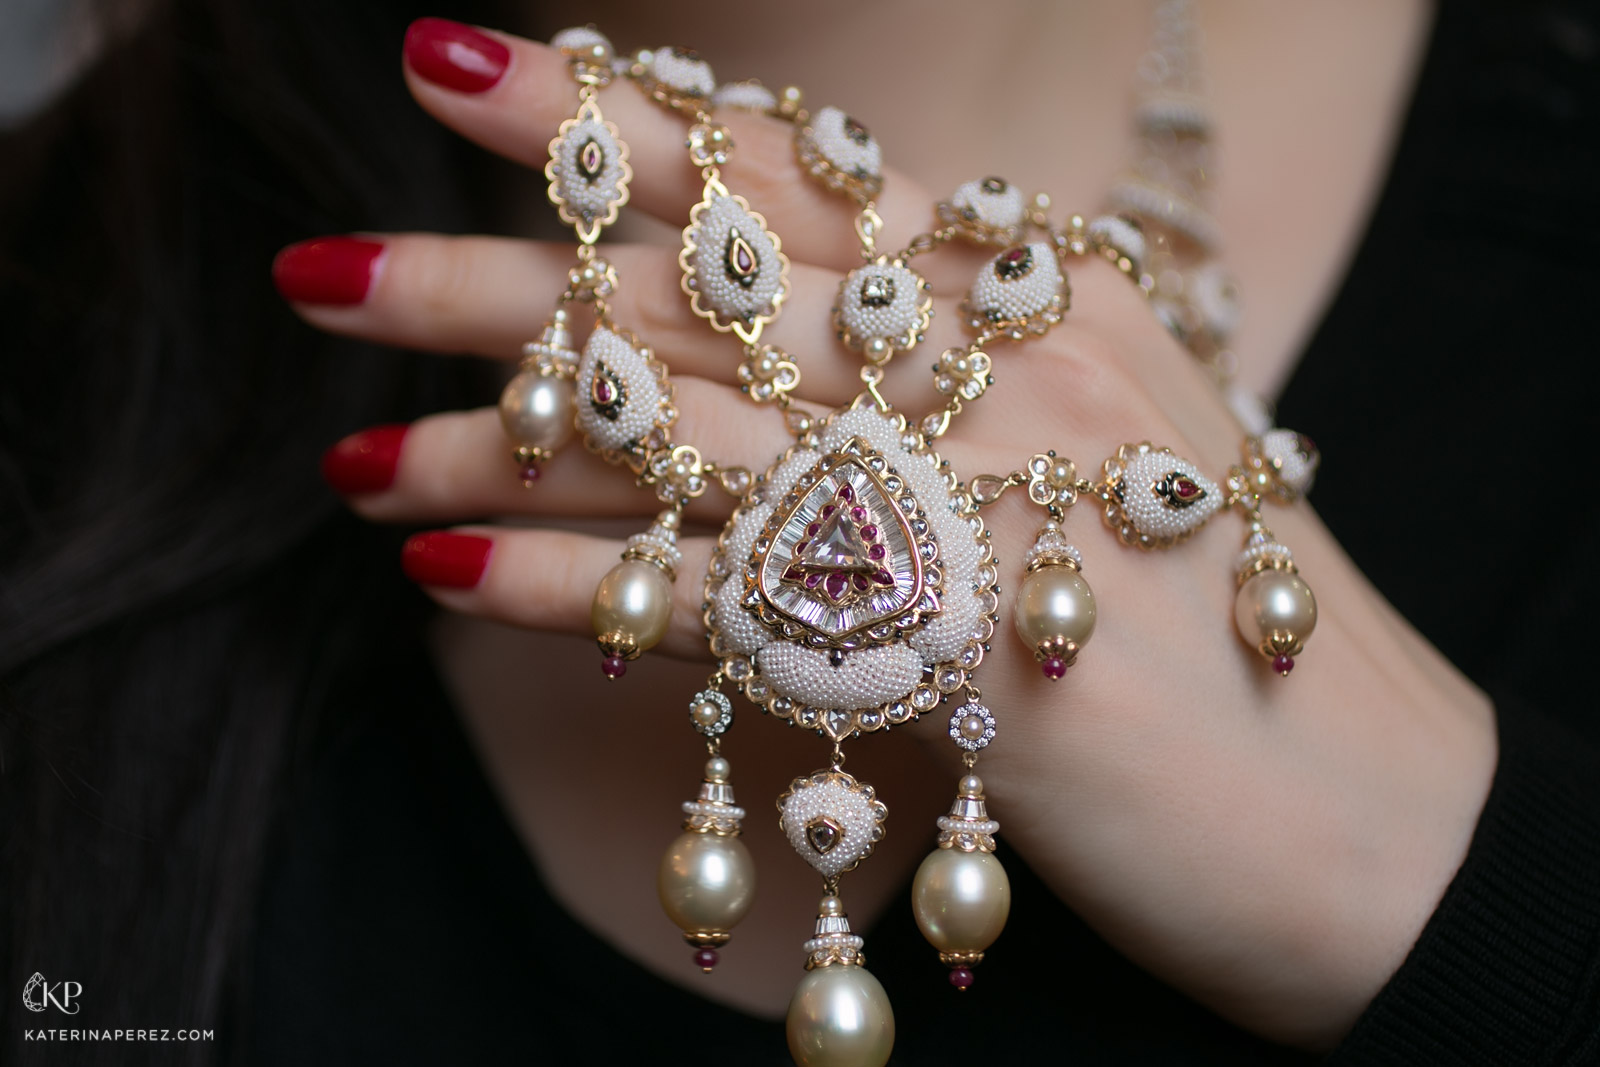 Moksh Jewellery necklace with pearl, rubies and diamonds